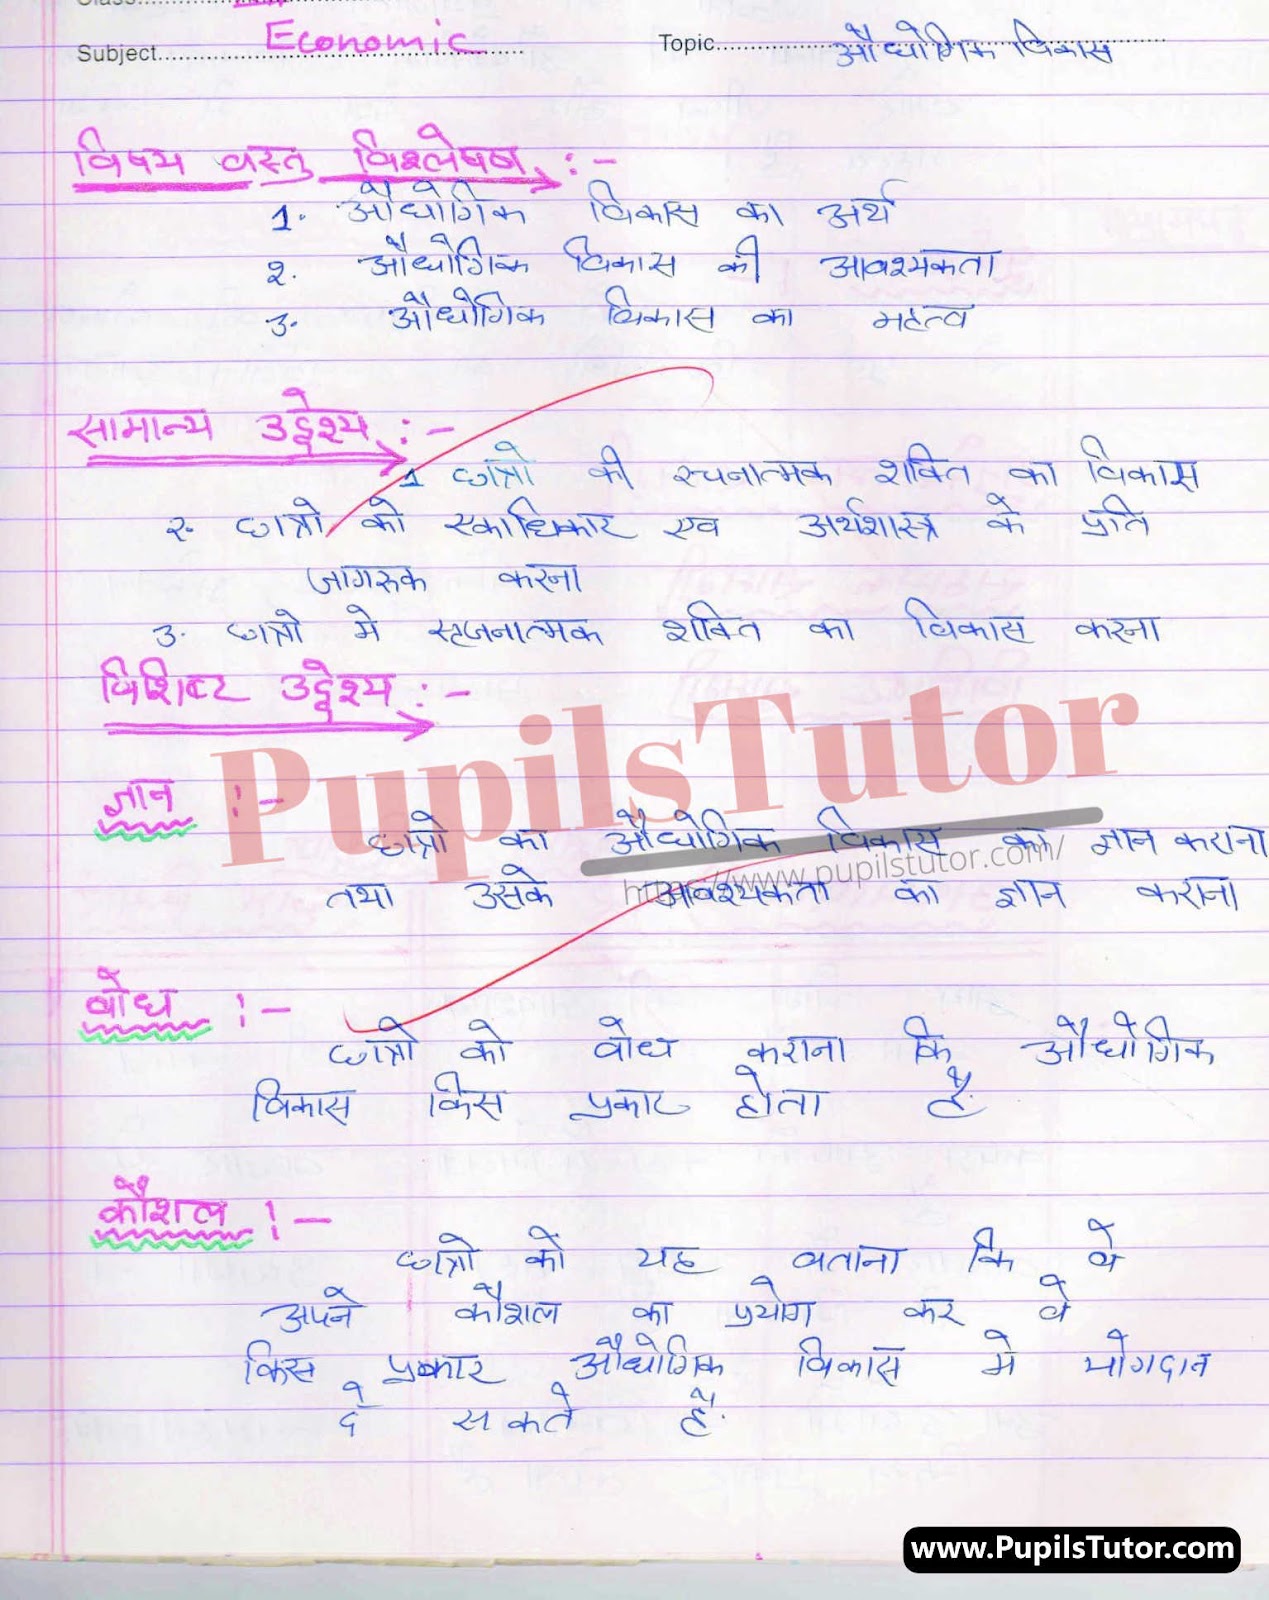 Audyogik Vikas Lesson Plan | Industrial Development Lesson Plan In Hindi For Class 12 – (Page And Image Number 1) – Pupils Tutor